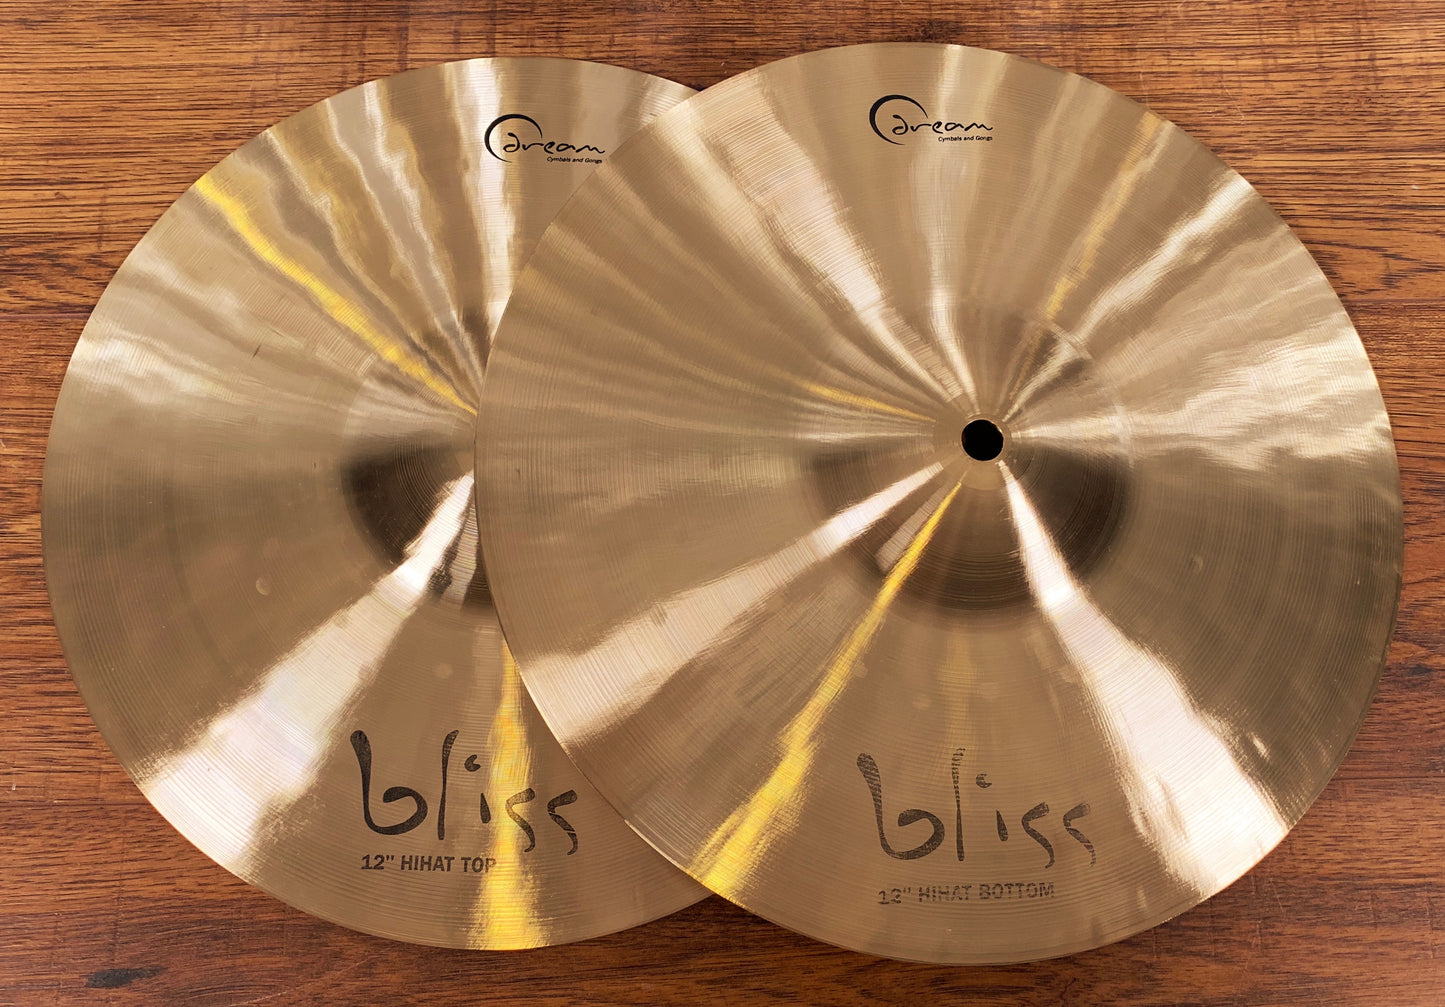 Dream Cymbals BHH12 Bliss Hand Forged & Hammered 12" Hi Hat Set